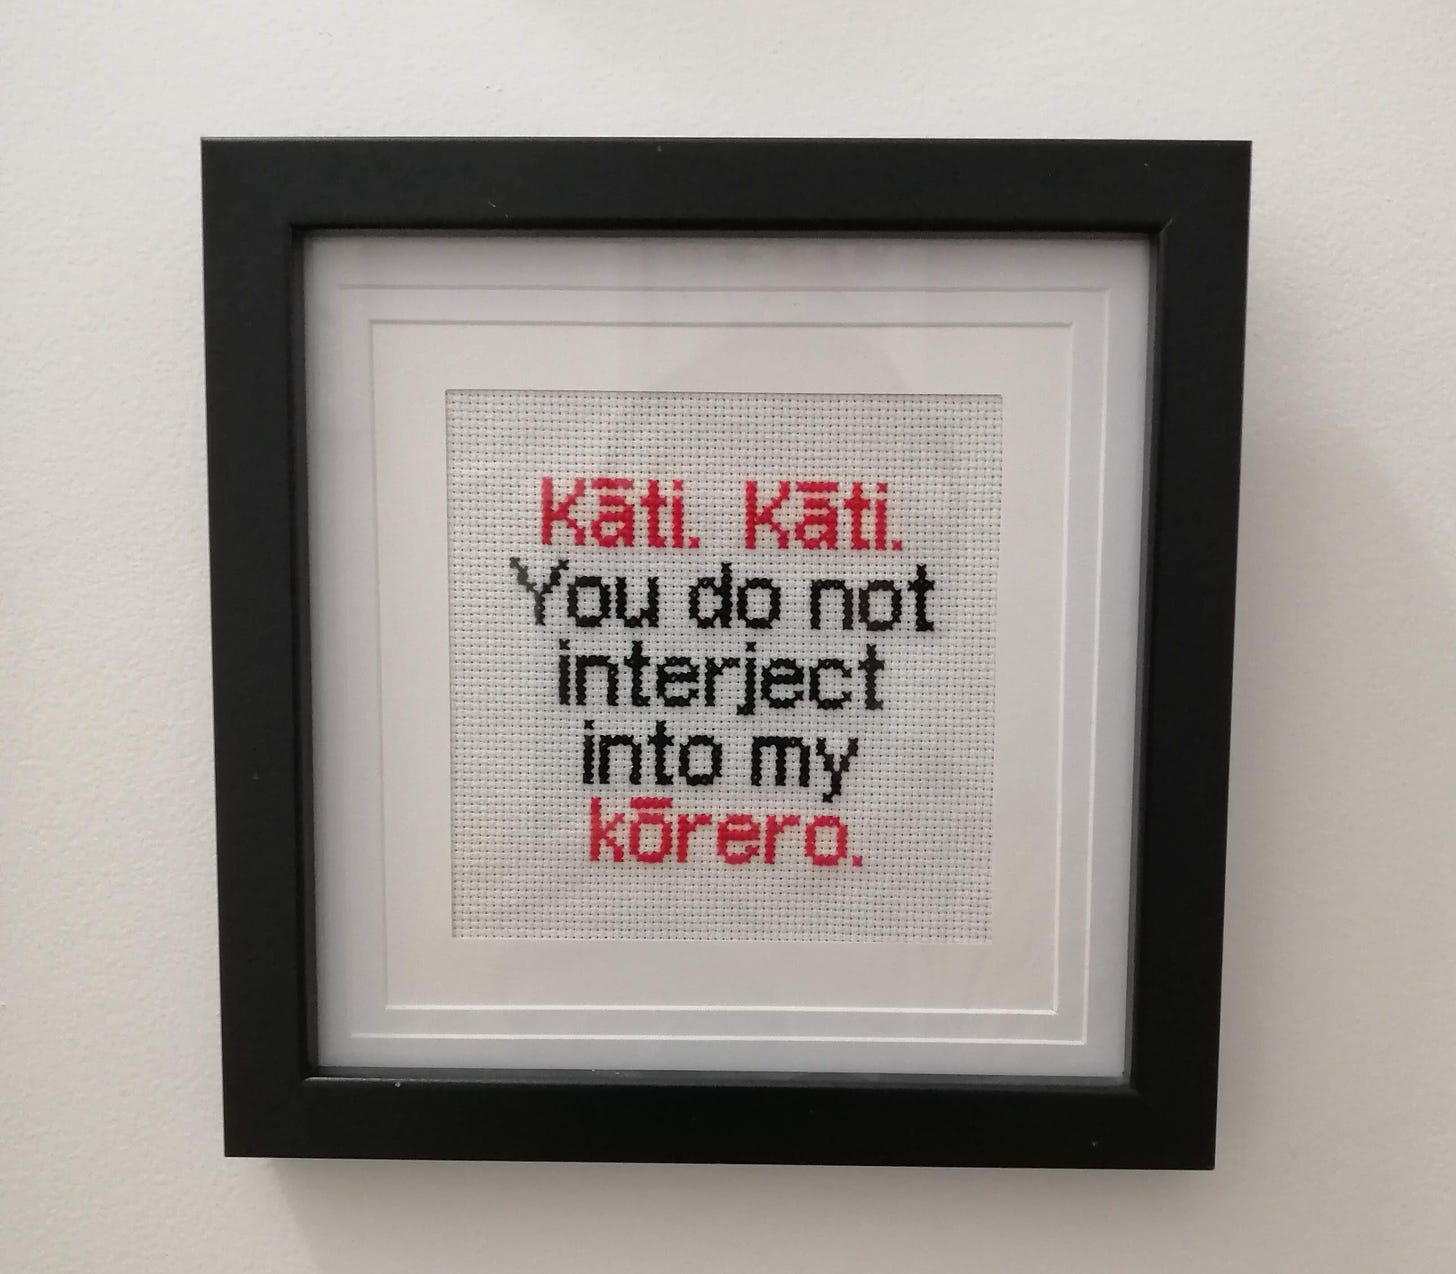 Cross stitch in a frame with text that says "kāti. Kāti. You do not interject into my kōrero"